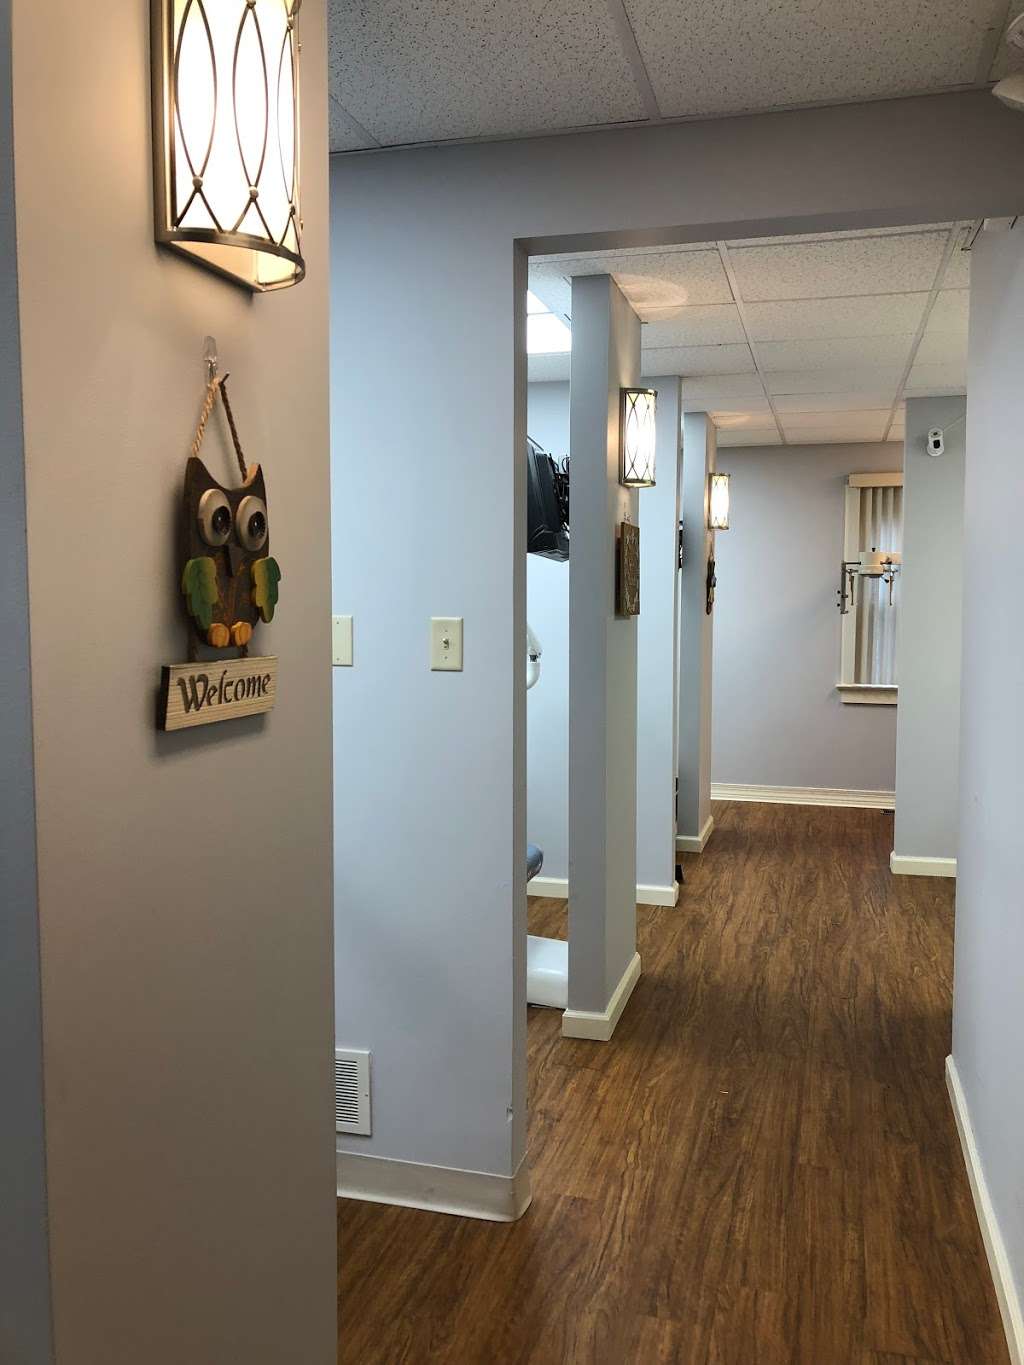 Aspire Dental Care | 27 Turner Ln, West Chester, PA 19380 | Phone: (610) 696-9135